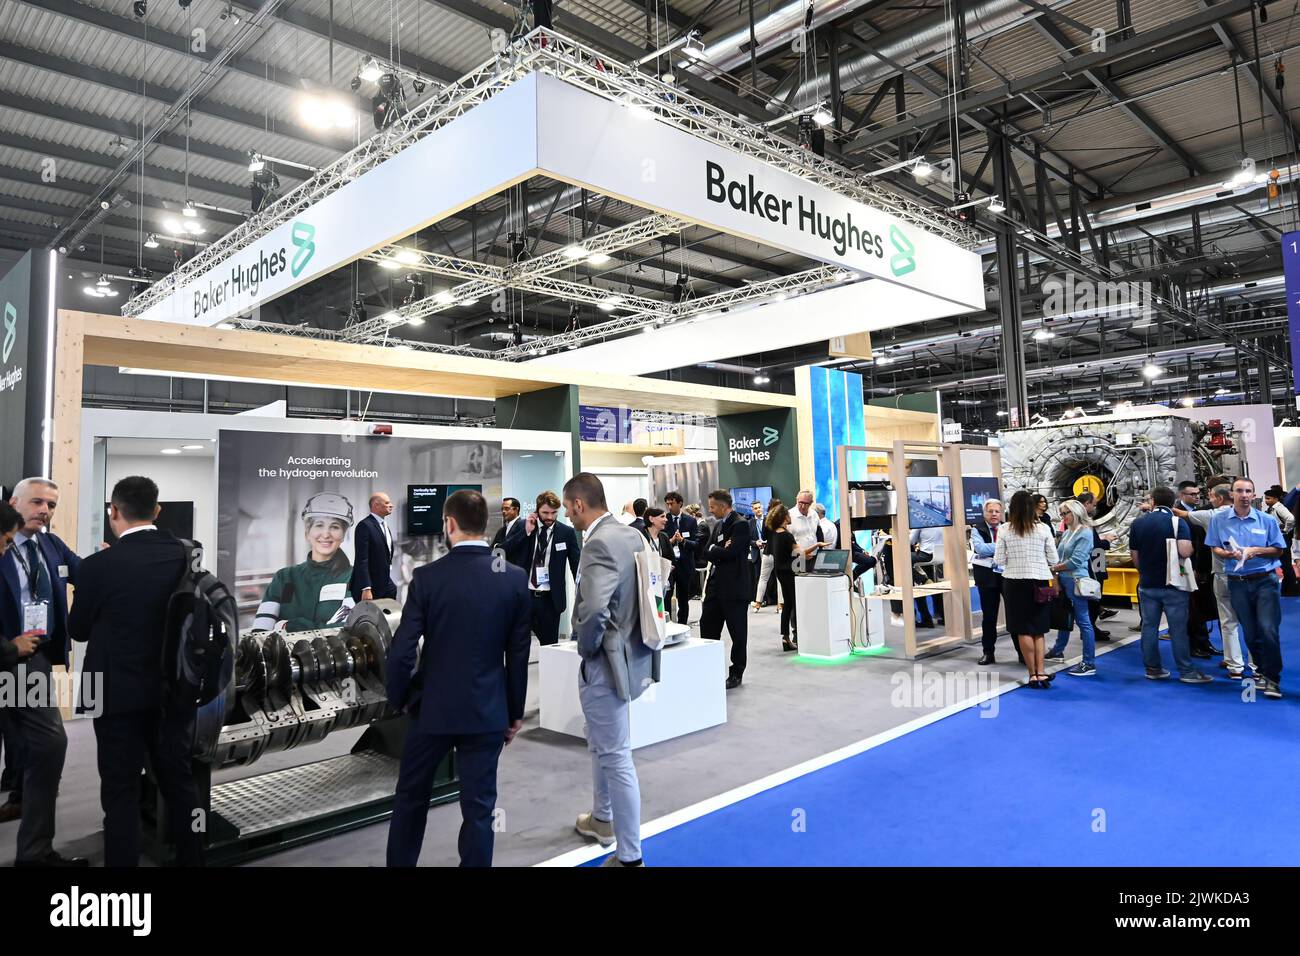 MILAN, ITALY - SEPTEMBER 6, 2022: a view of the Baker Hughes stand during Gastech 2022 trade show event in Milan Fair. Visitors and people in the hall walk through exhibitors stands and exhibit booths. Stock Photo